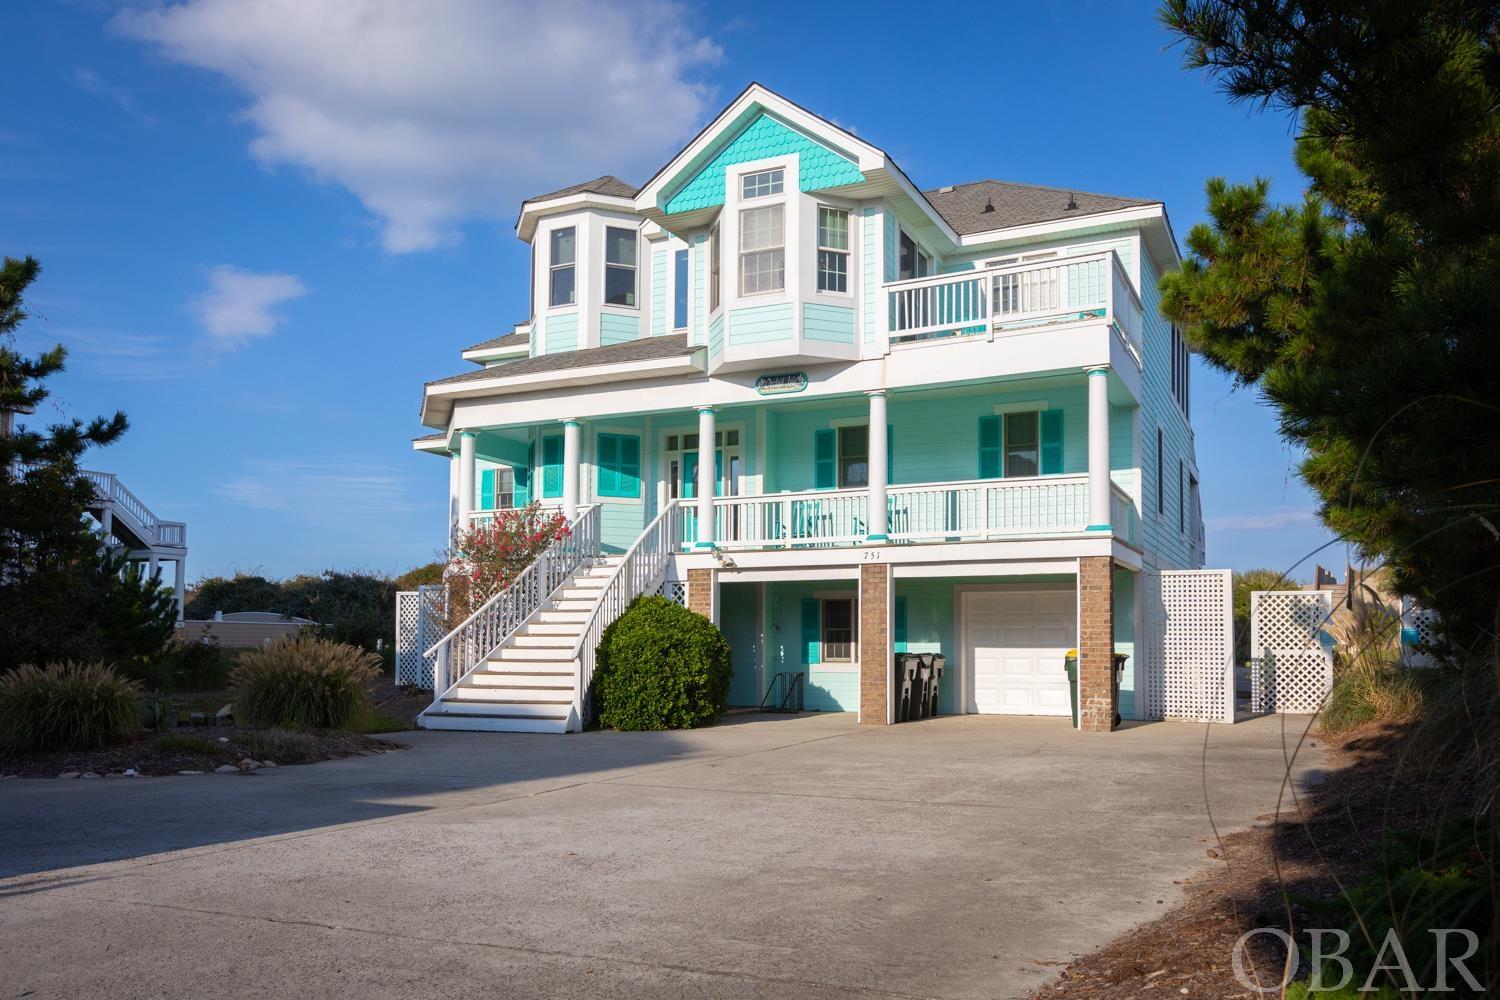 Tier 1 Buck Island Oceanfront 6bed/5.5bath fully-furnished active rental w/private oceanside pool! Since late Jan 2020 seller has made big-ticket quality upgrades, including NEW ROOF installed Sept 14, 2023; Exterior PAINT (before painting, all necessary SIDING/TRIM was replaced); many WINDOWS were replaced including HUGE top-level oceanside picture windows, den SLIDER and surrounding WALLS in living area and ENSUITE KING bedroom...so you can AWAKE TO SEE WAVES ON THE BEACH! Seller also replaced/upgraded POOL lip/edge with travertine, and installed larger POOL PUMP/FILTER. Installed ALL NEW COMPOSITE TOP-LEVEL DECKING & STAIR TREADS. Moved HOT TUB to pool area for easier usage. Expansive mid-level covered poolside deck. Built separate 8x7 lockable OWNER'S STORAGE in rear of garage (still plenty of garage space for bikes, beach toys, etc.). OUTDOOR SHOWER was upgraded and LANDSCAPING was redone. Large rooms and THREE KING ENSUITES. Front covered ROCKING PORCH; in rear, all oceanside decks lead down to pool and dune beach walkover! Buck Island is a planned development with fantastic private amenities, accessed by a securely-gated entrance, down a winding lit, tree-lined street with turtle ponds dotted alongside. Shared dune walkover with only one neighbor, at southernmost end for more private-feeling beach relaxation. INCOME CAN BE HIGHER--seller limits to June, July & August only, and also takes personal in-season weeks (totaling approx $10k each year in 2021 & 2022, and about $23k in 2023). See two nearly identical professional local management projections on file--estimates for $186,000+ gross if calendar is expanded! A third is even higher with a list of proposed upgrades.